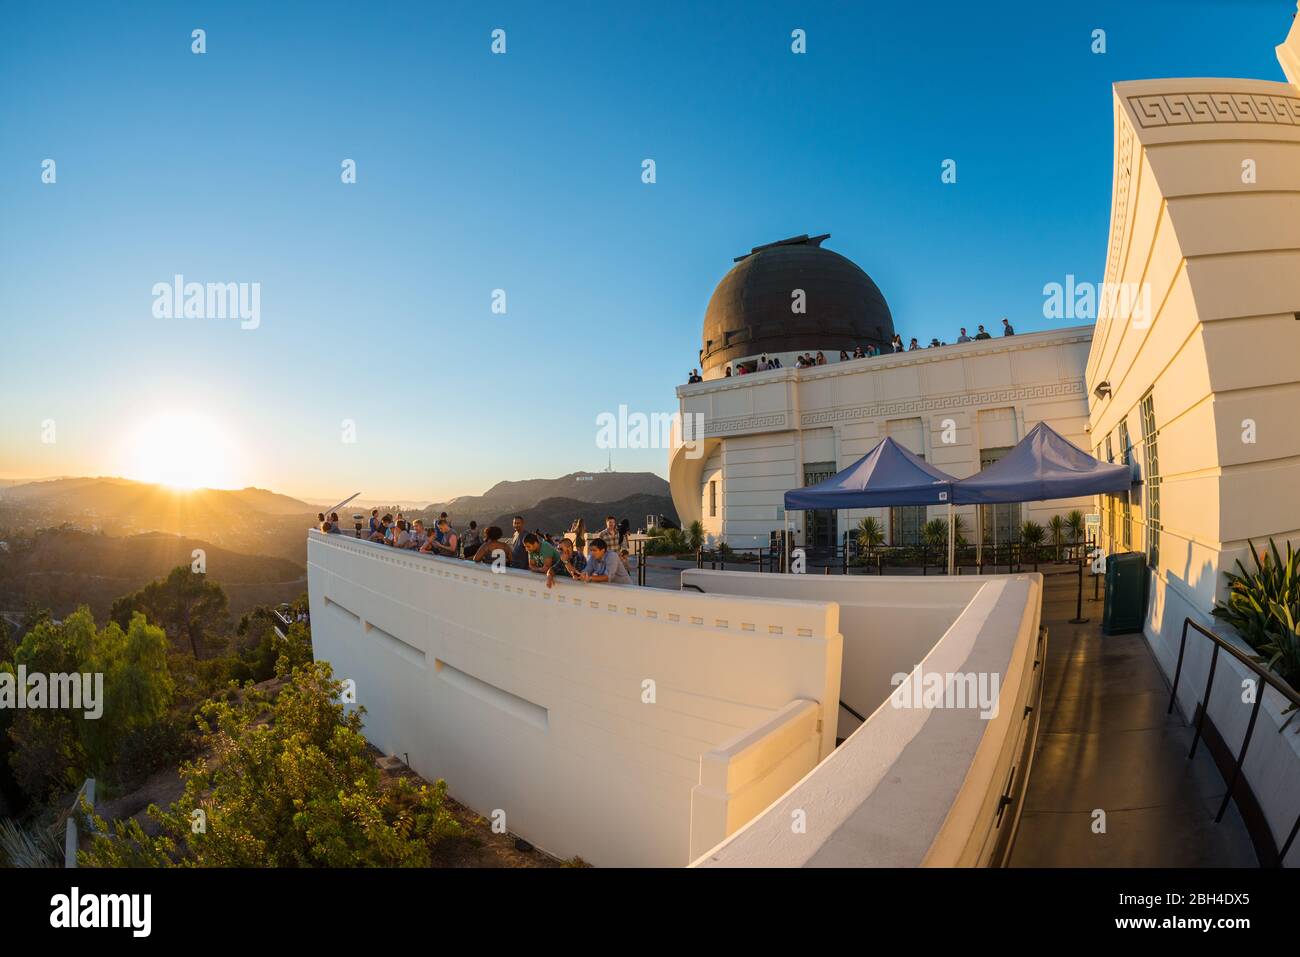 Los Angeles, California, USA. 19th September 2018. People watching sunset from the top of Griffith Observatory. Clear sky, white bulding and dome Stock Photo